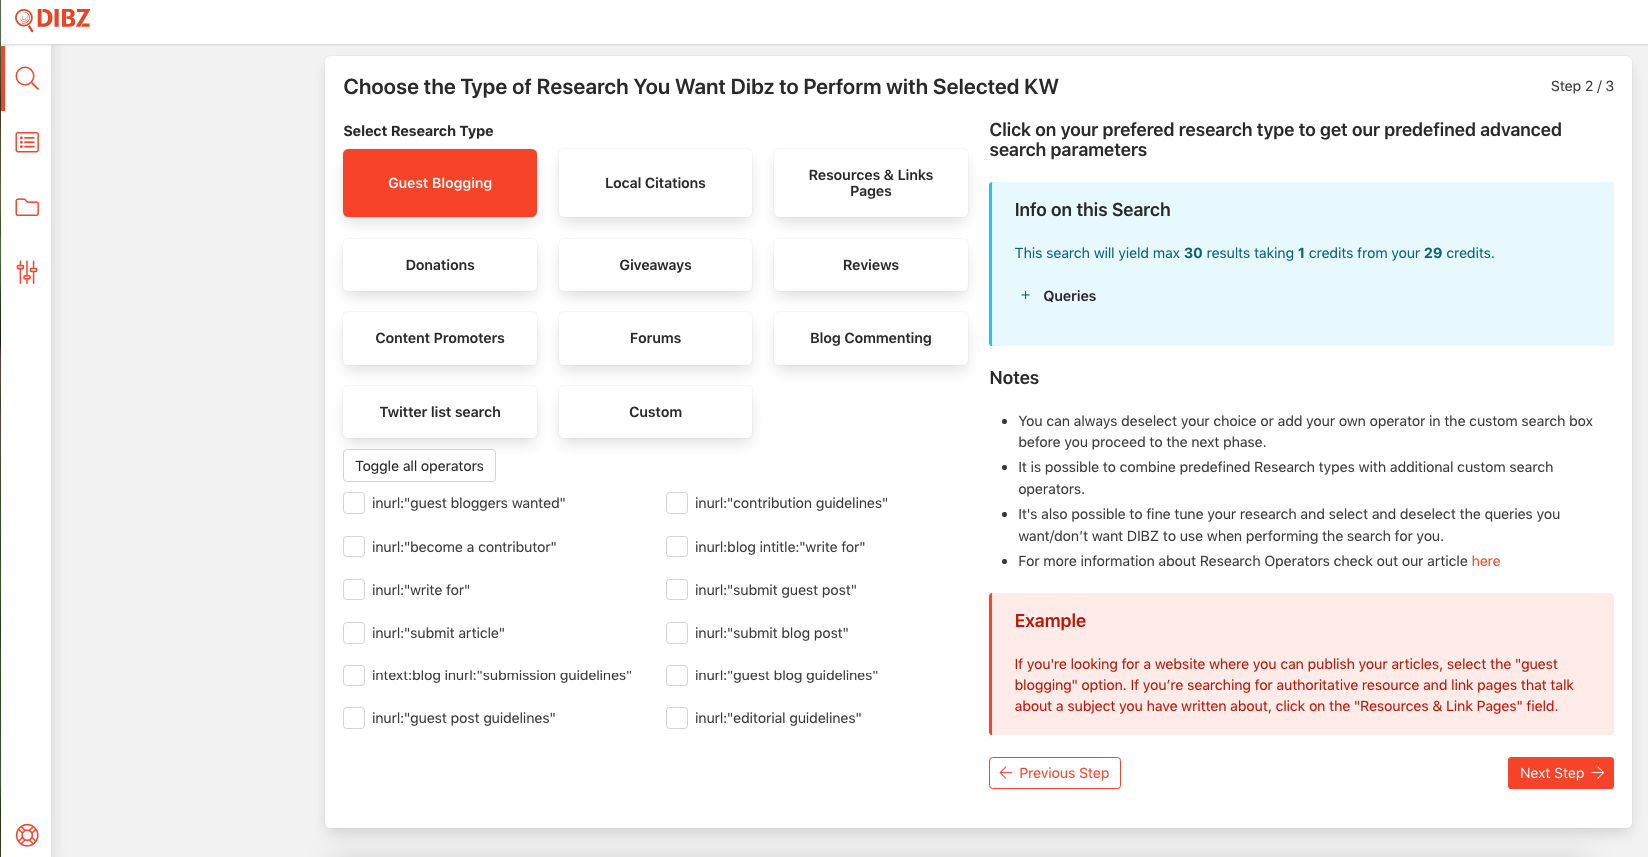 Choosing the Type of Research You Want Dibz to Perform with Selected Keywords